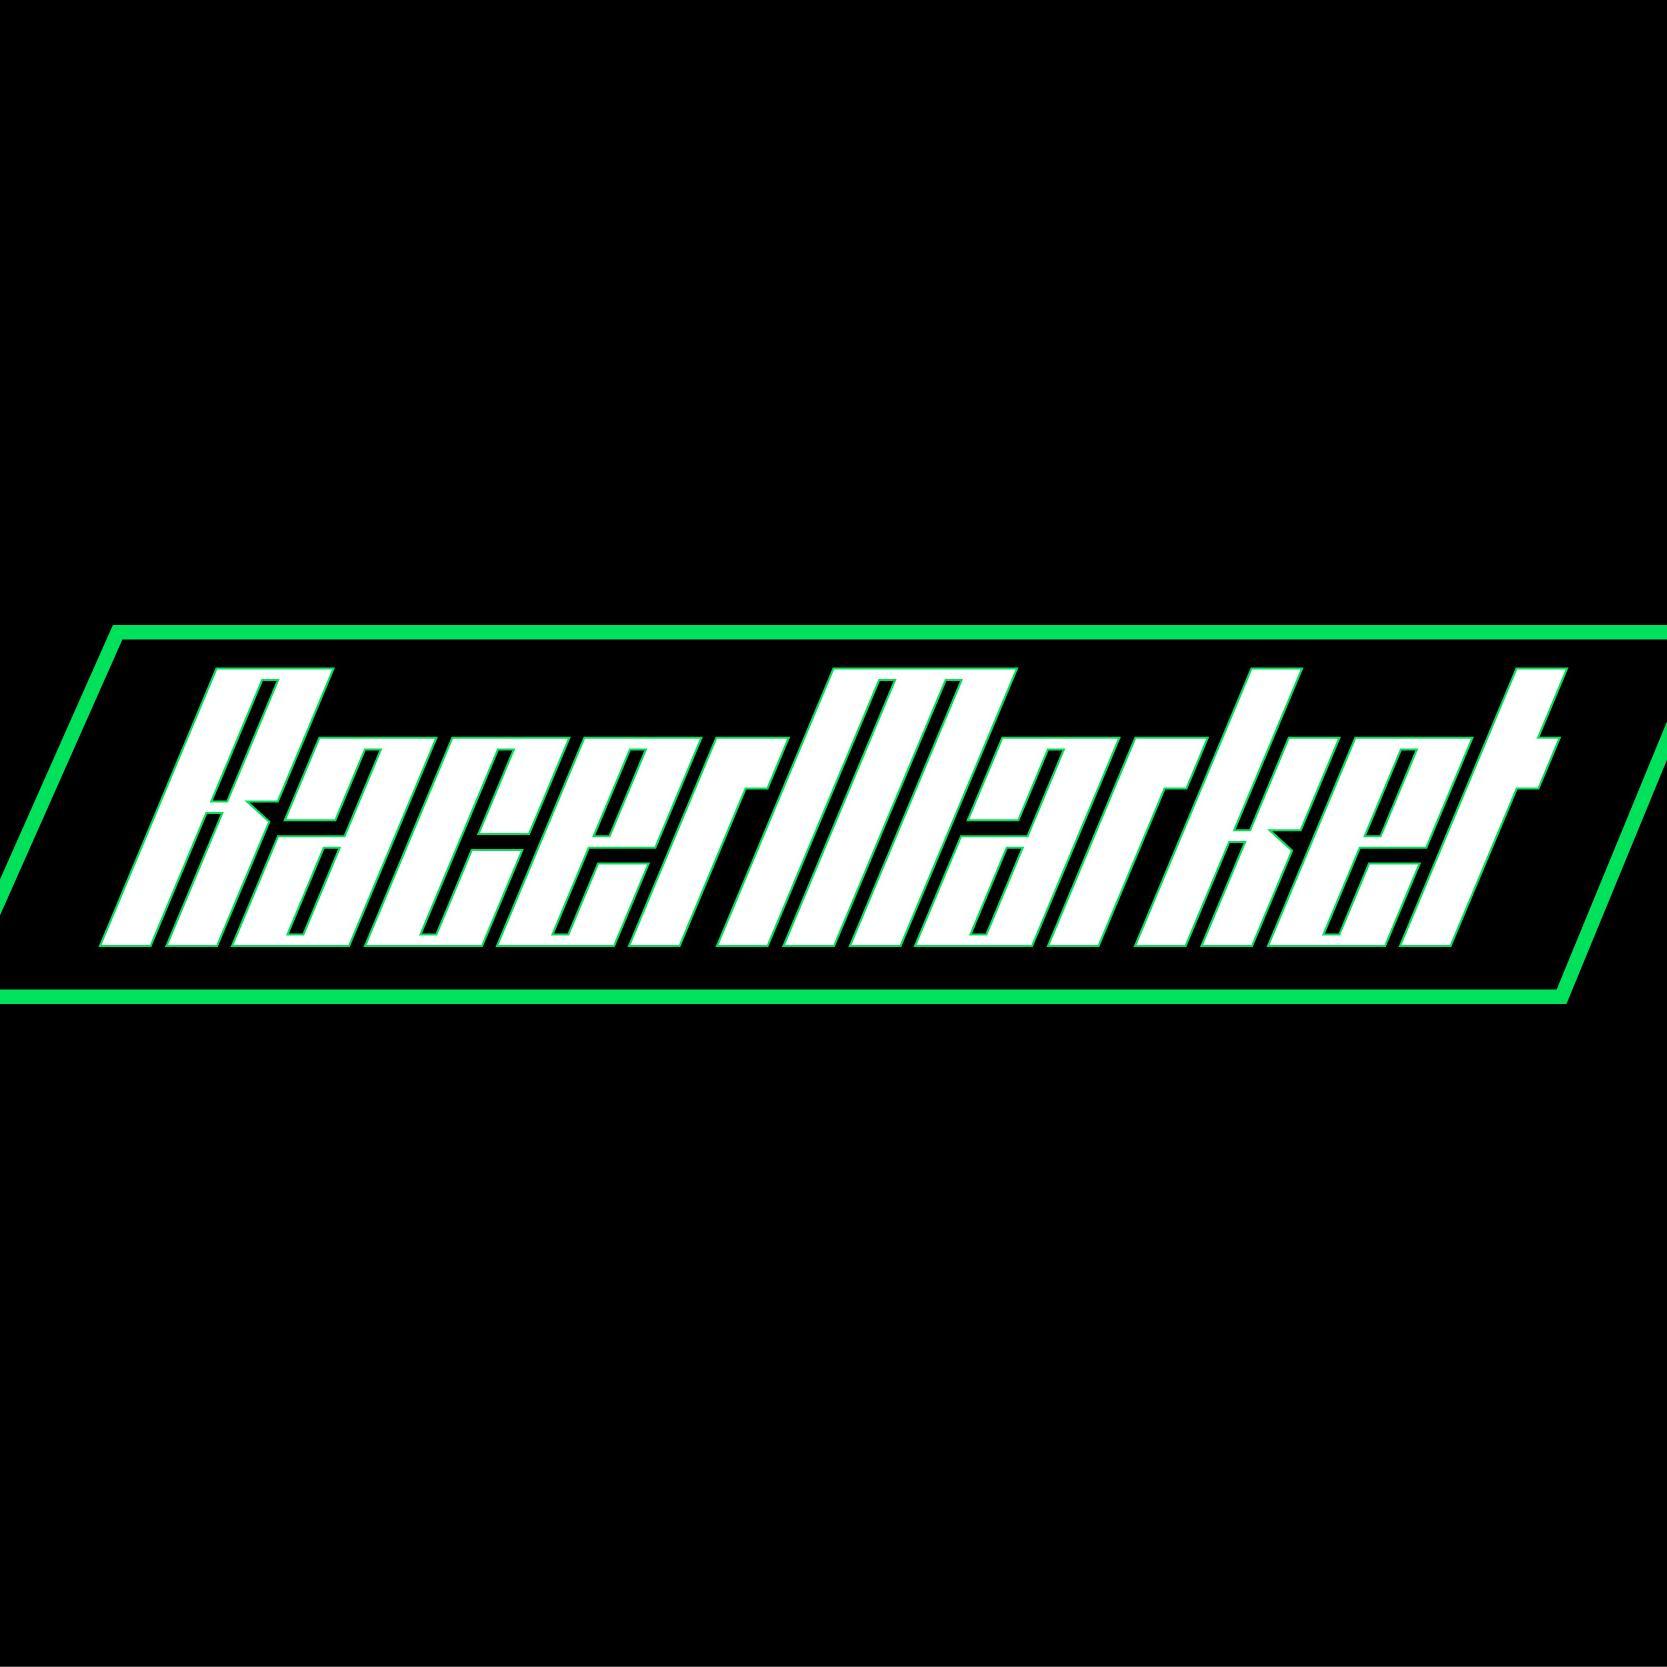 Racer Owned. Racer Driven. @RacerMarket is the leading marketing company in motorsports. Need Sponsors? Done. For inquires email RacerMarket@gmail.com